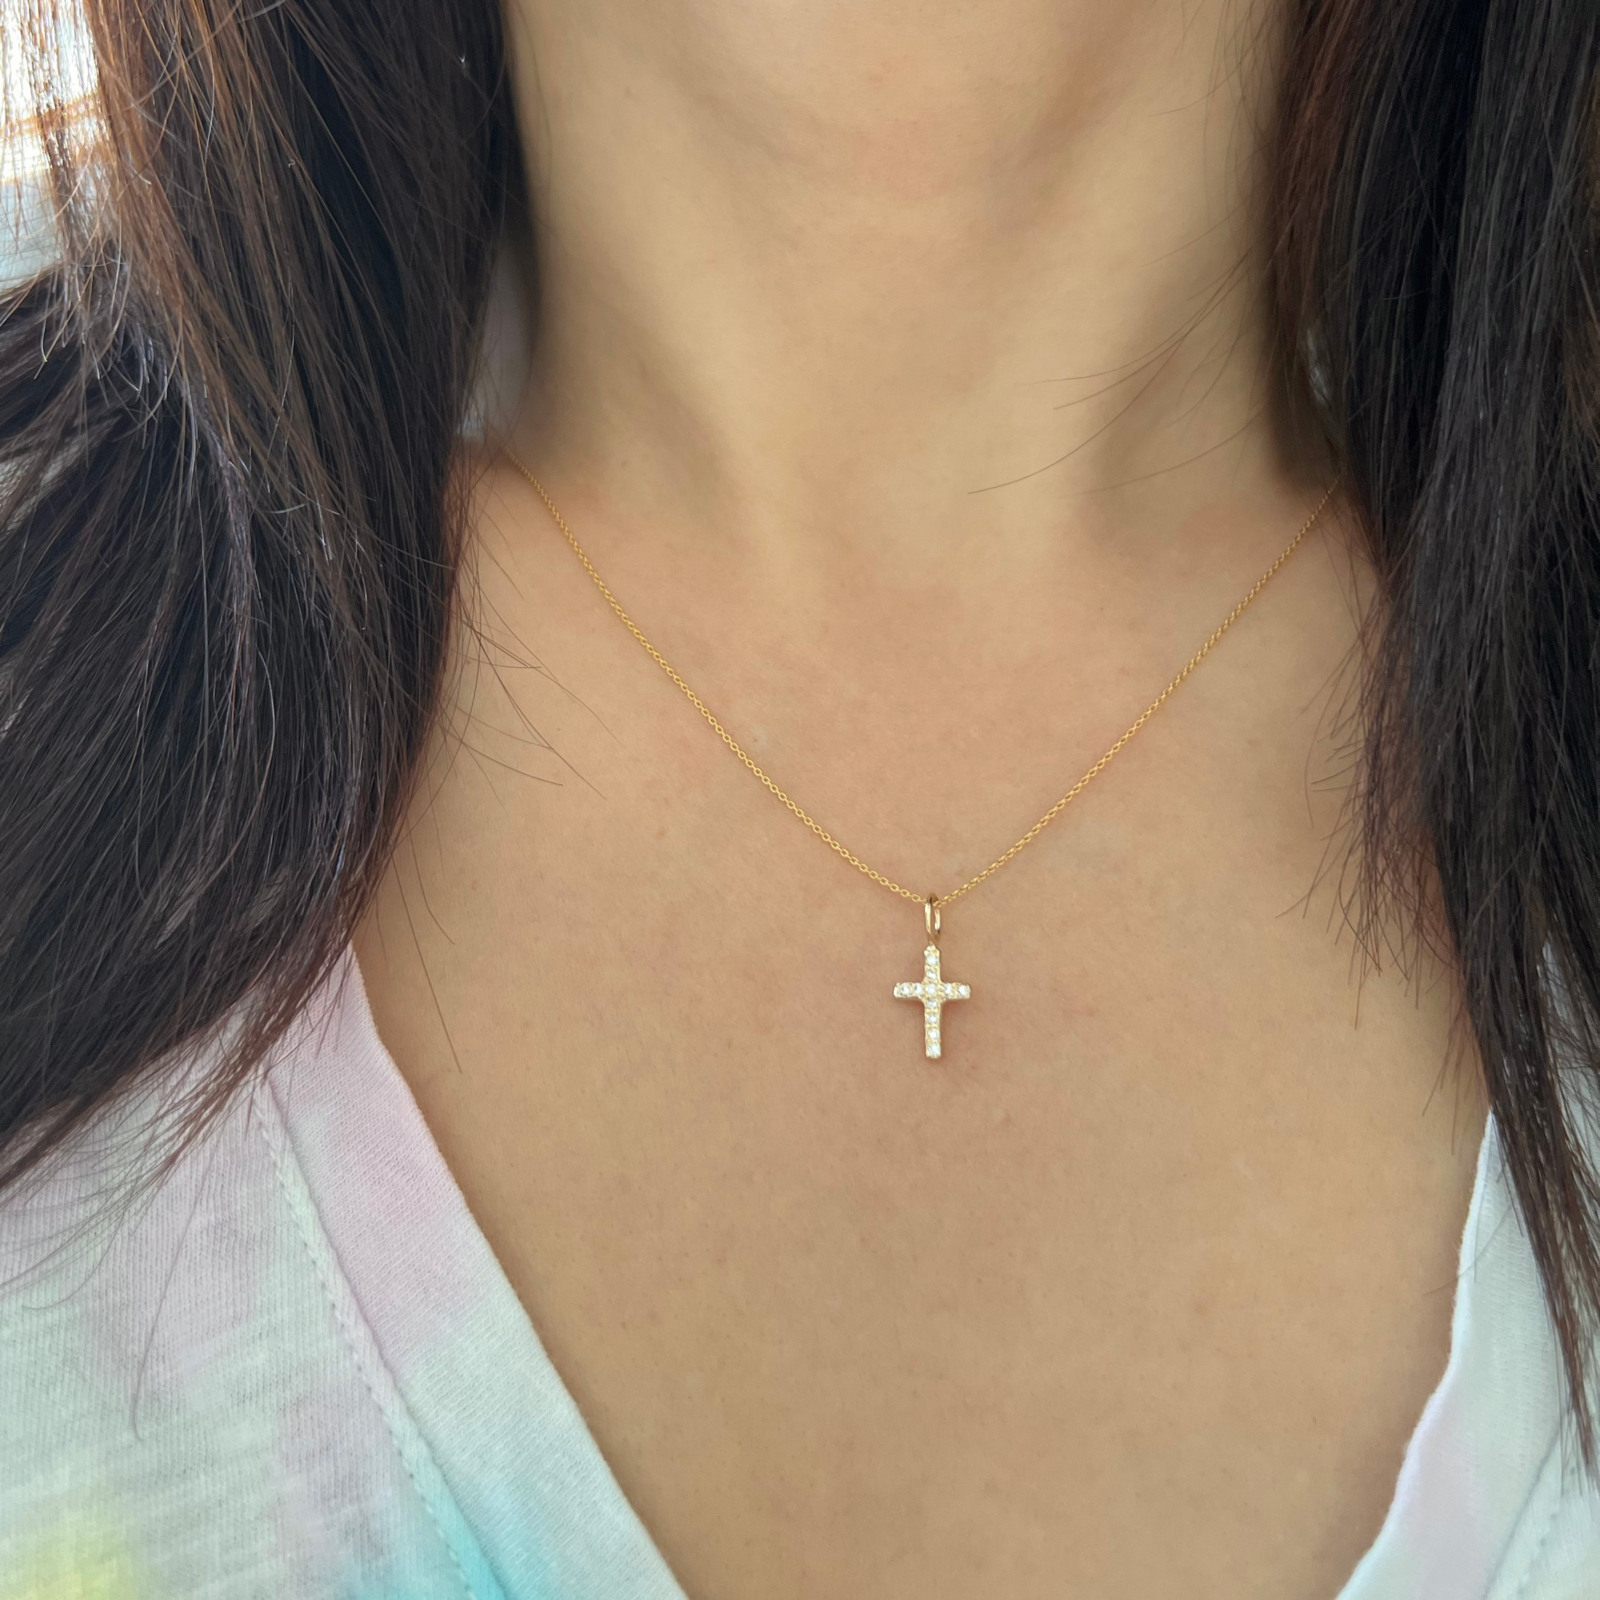 wearing the gold cross charm in 14k yellow gold with diamonds